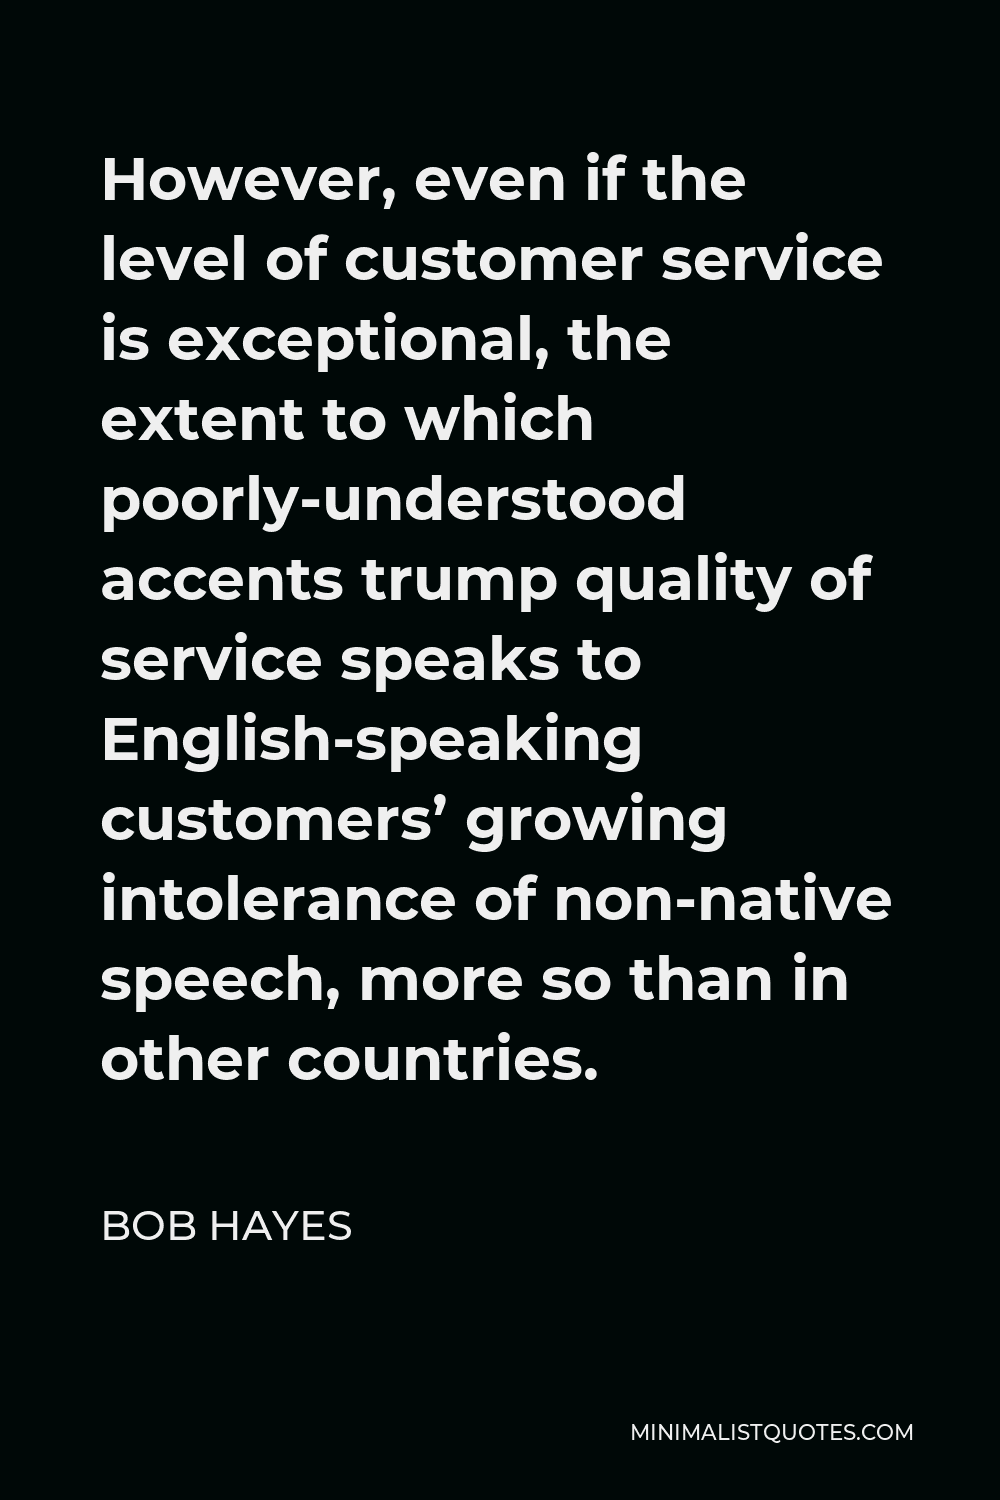 Bob Hayes Quote - However, even if the level of customer service is exceptional, the extent to which poorly-understood accents trump quality of service speaks to English-speaking customers’ growing intolerance of non-native speech, more so than in other countries.